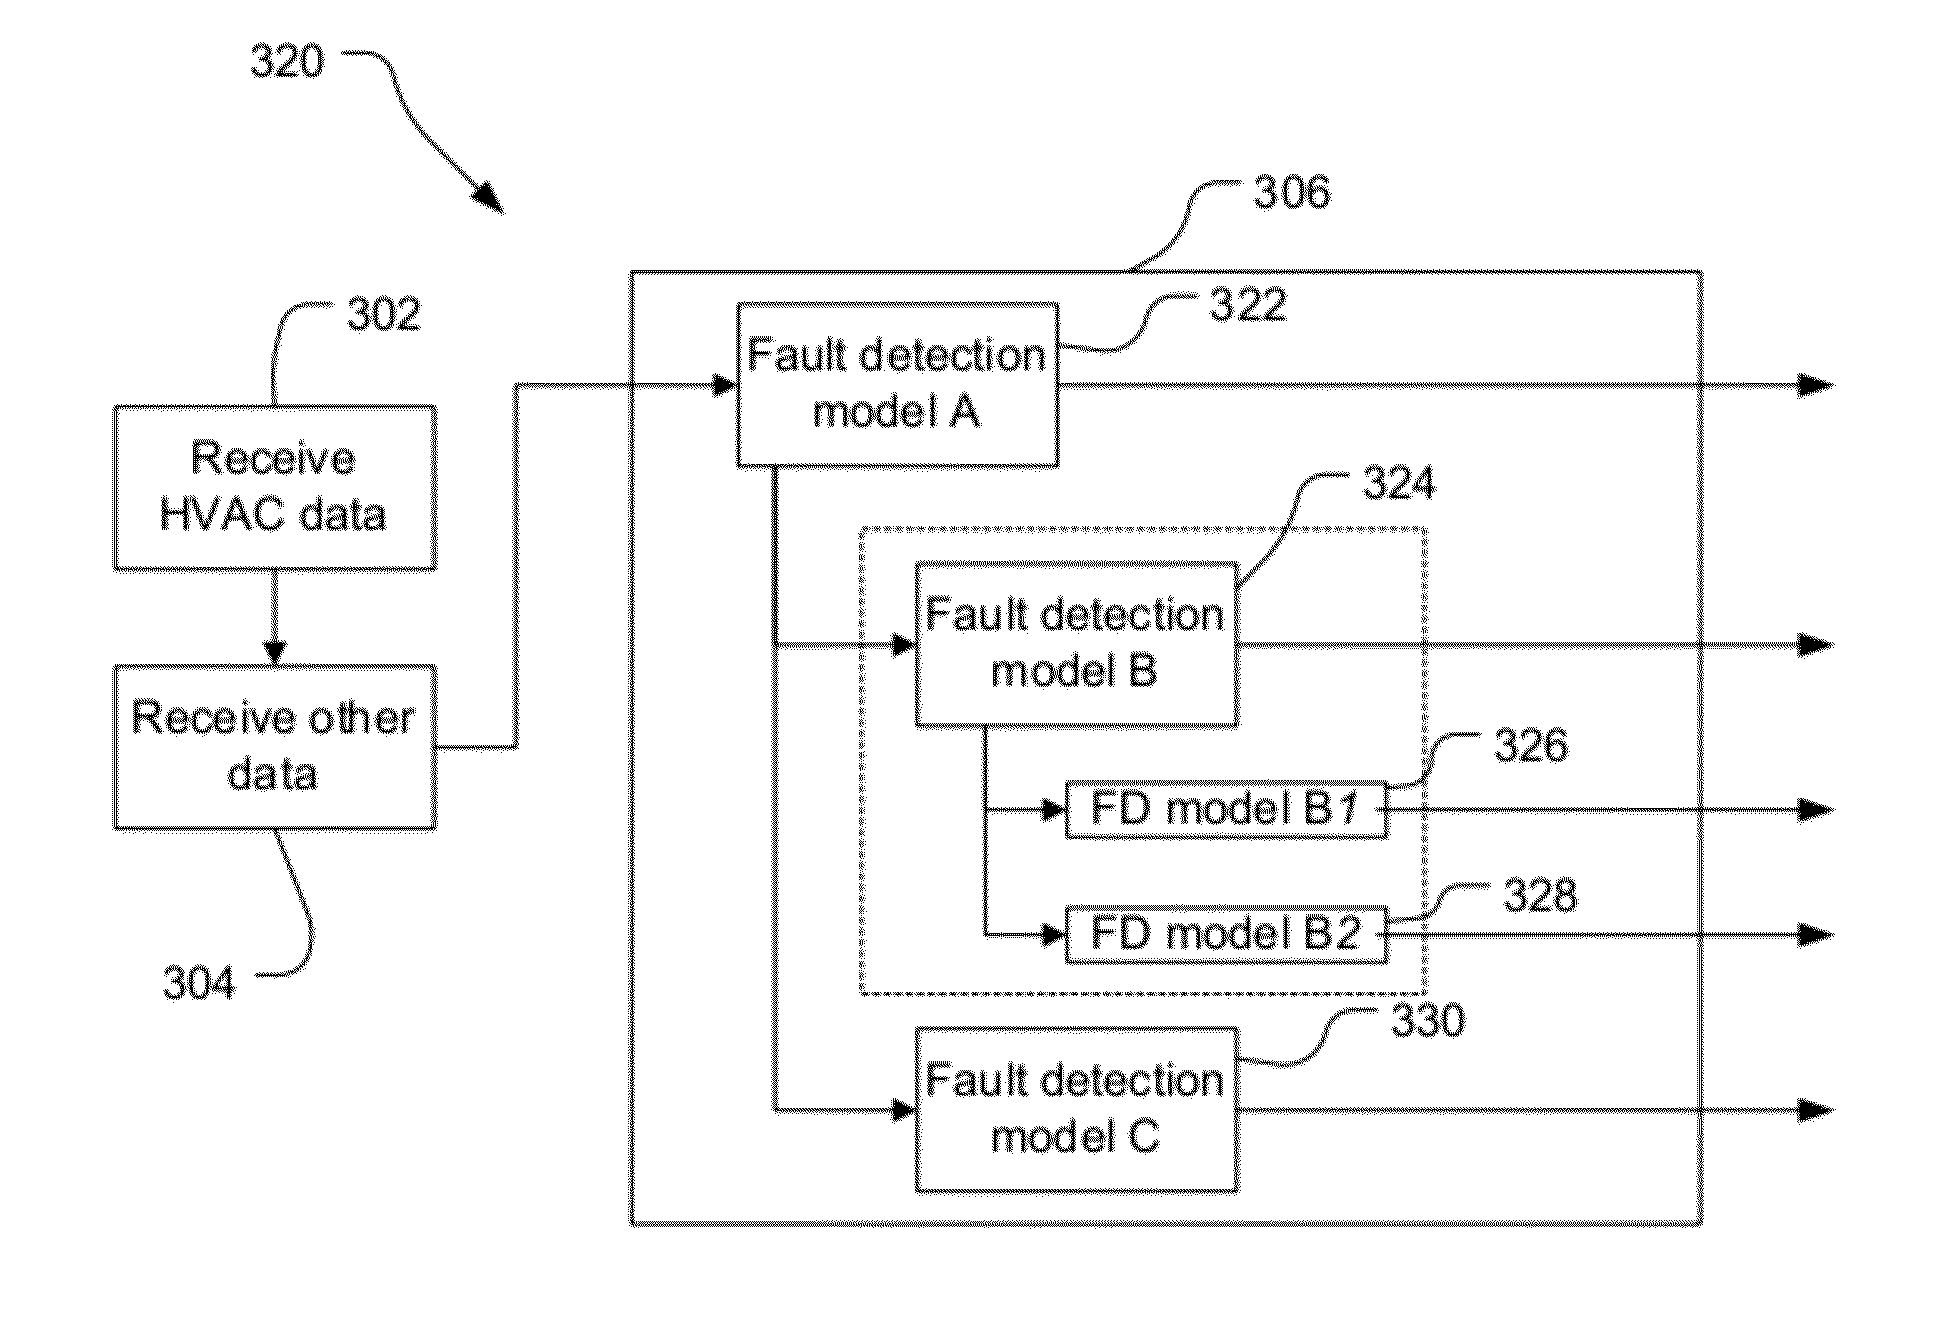 System and method for the detection of faults in a multi-variable system utilizing both a model for normal operation and a model for faulty operation